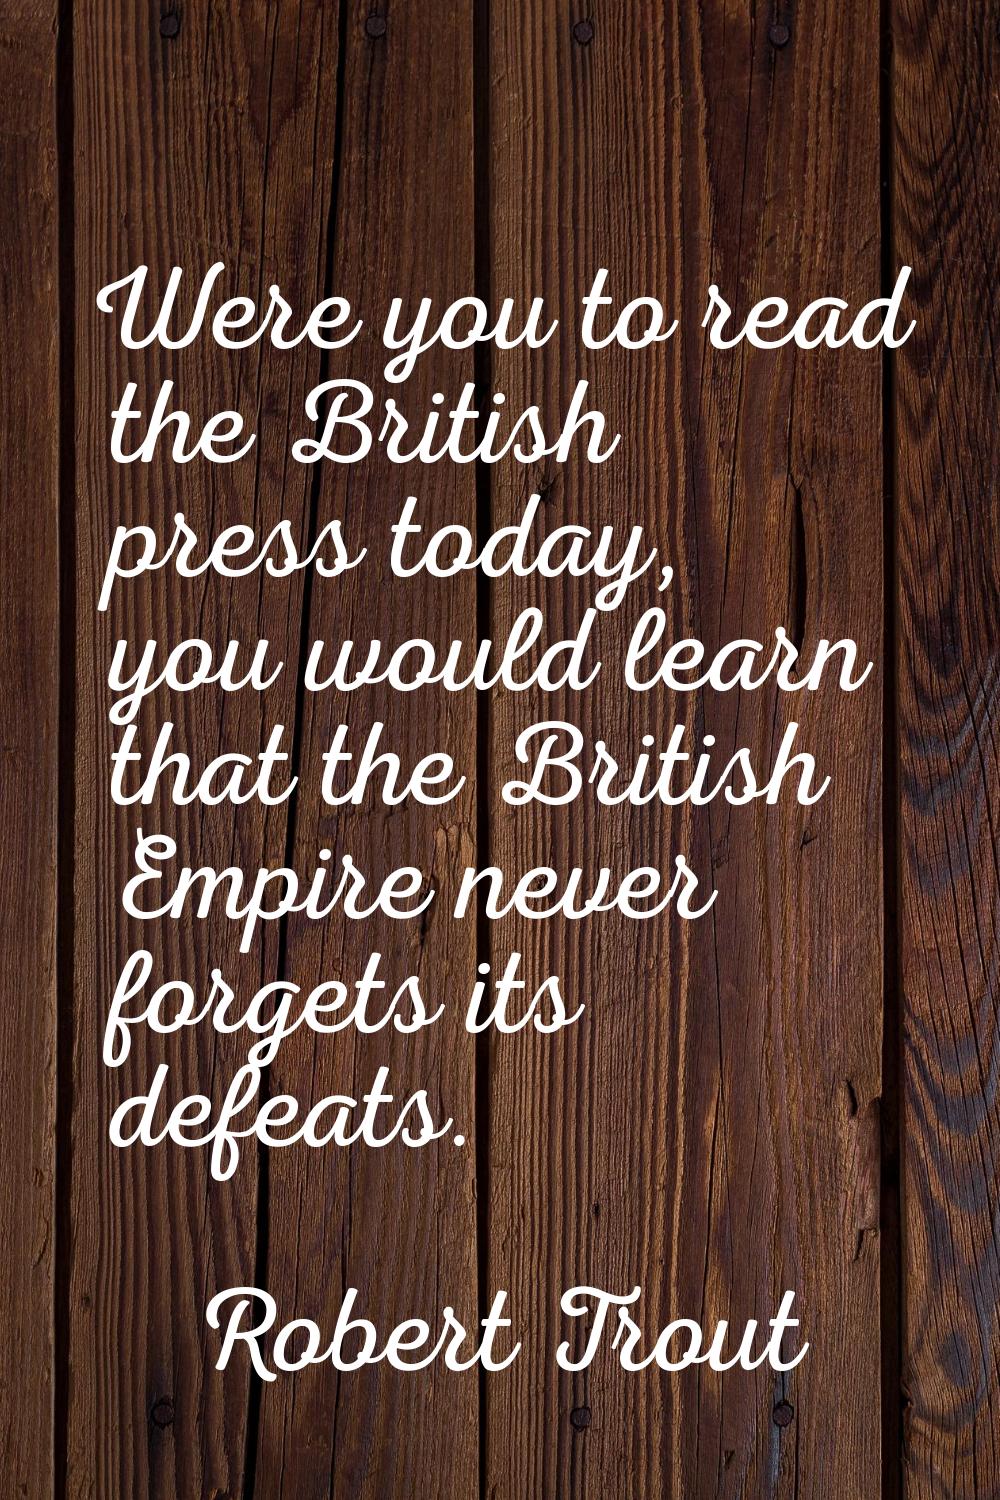 Were you to read the British press today, you would learn that the British Empire never forgets its